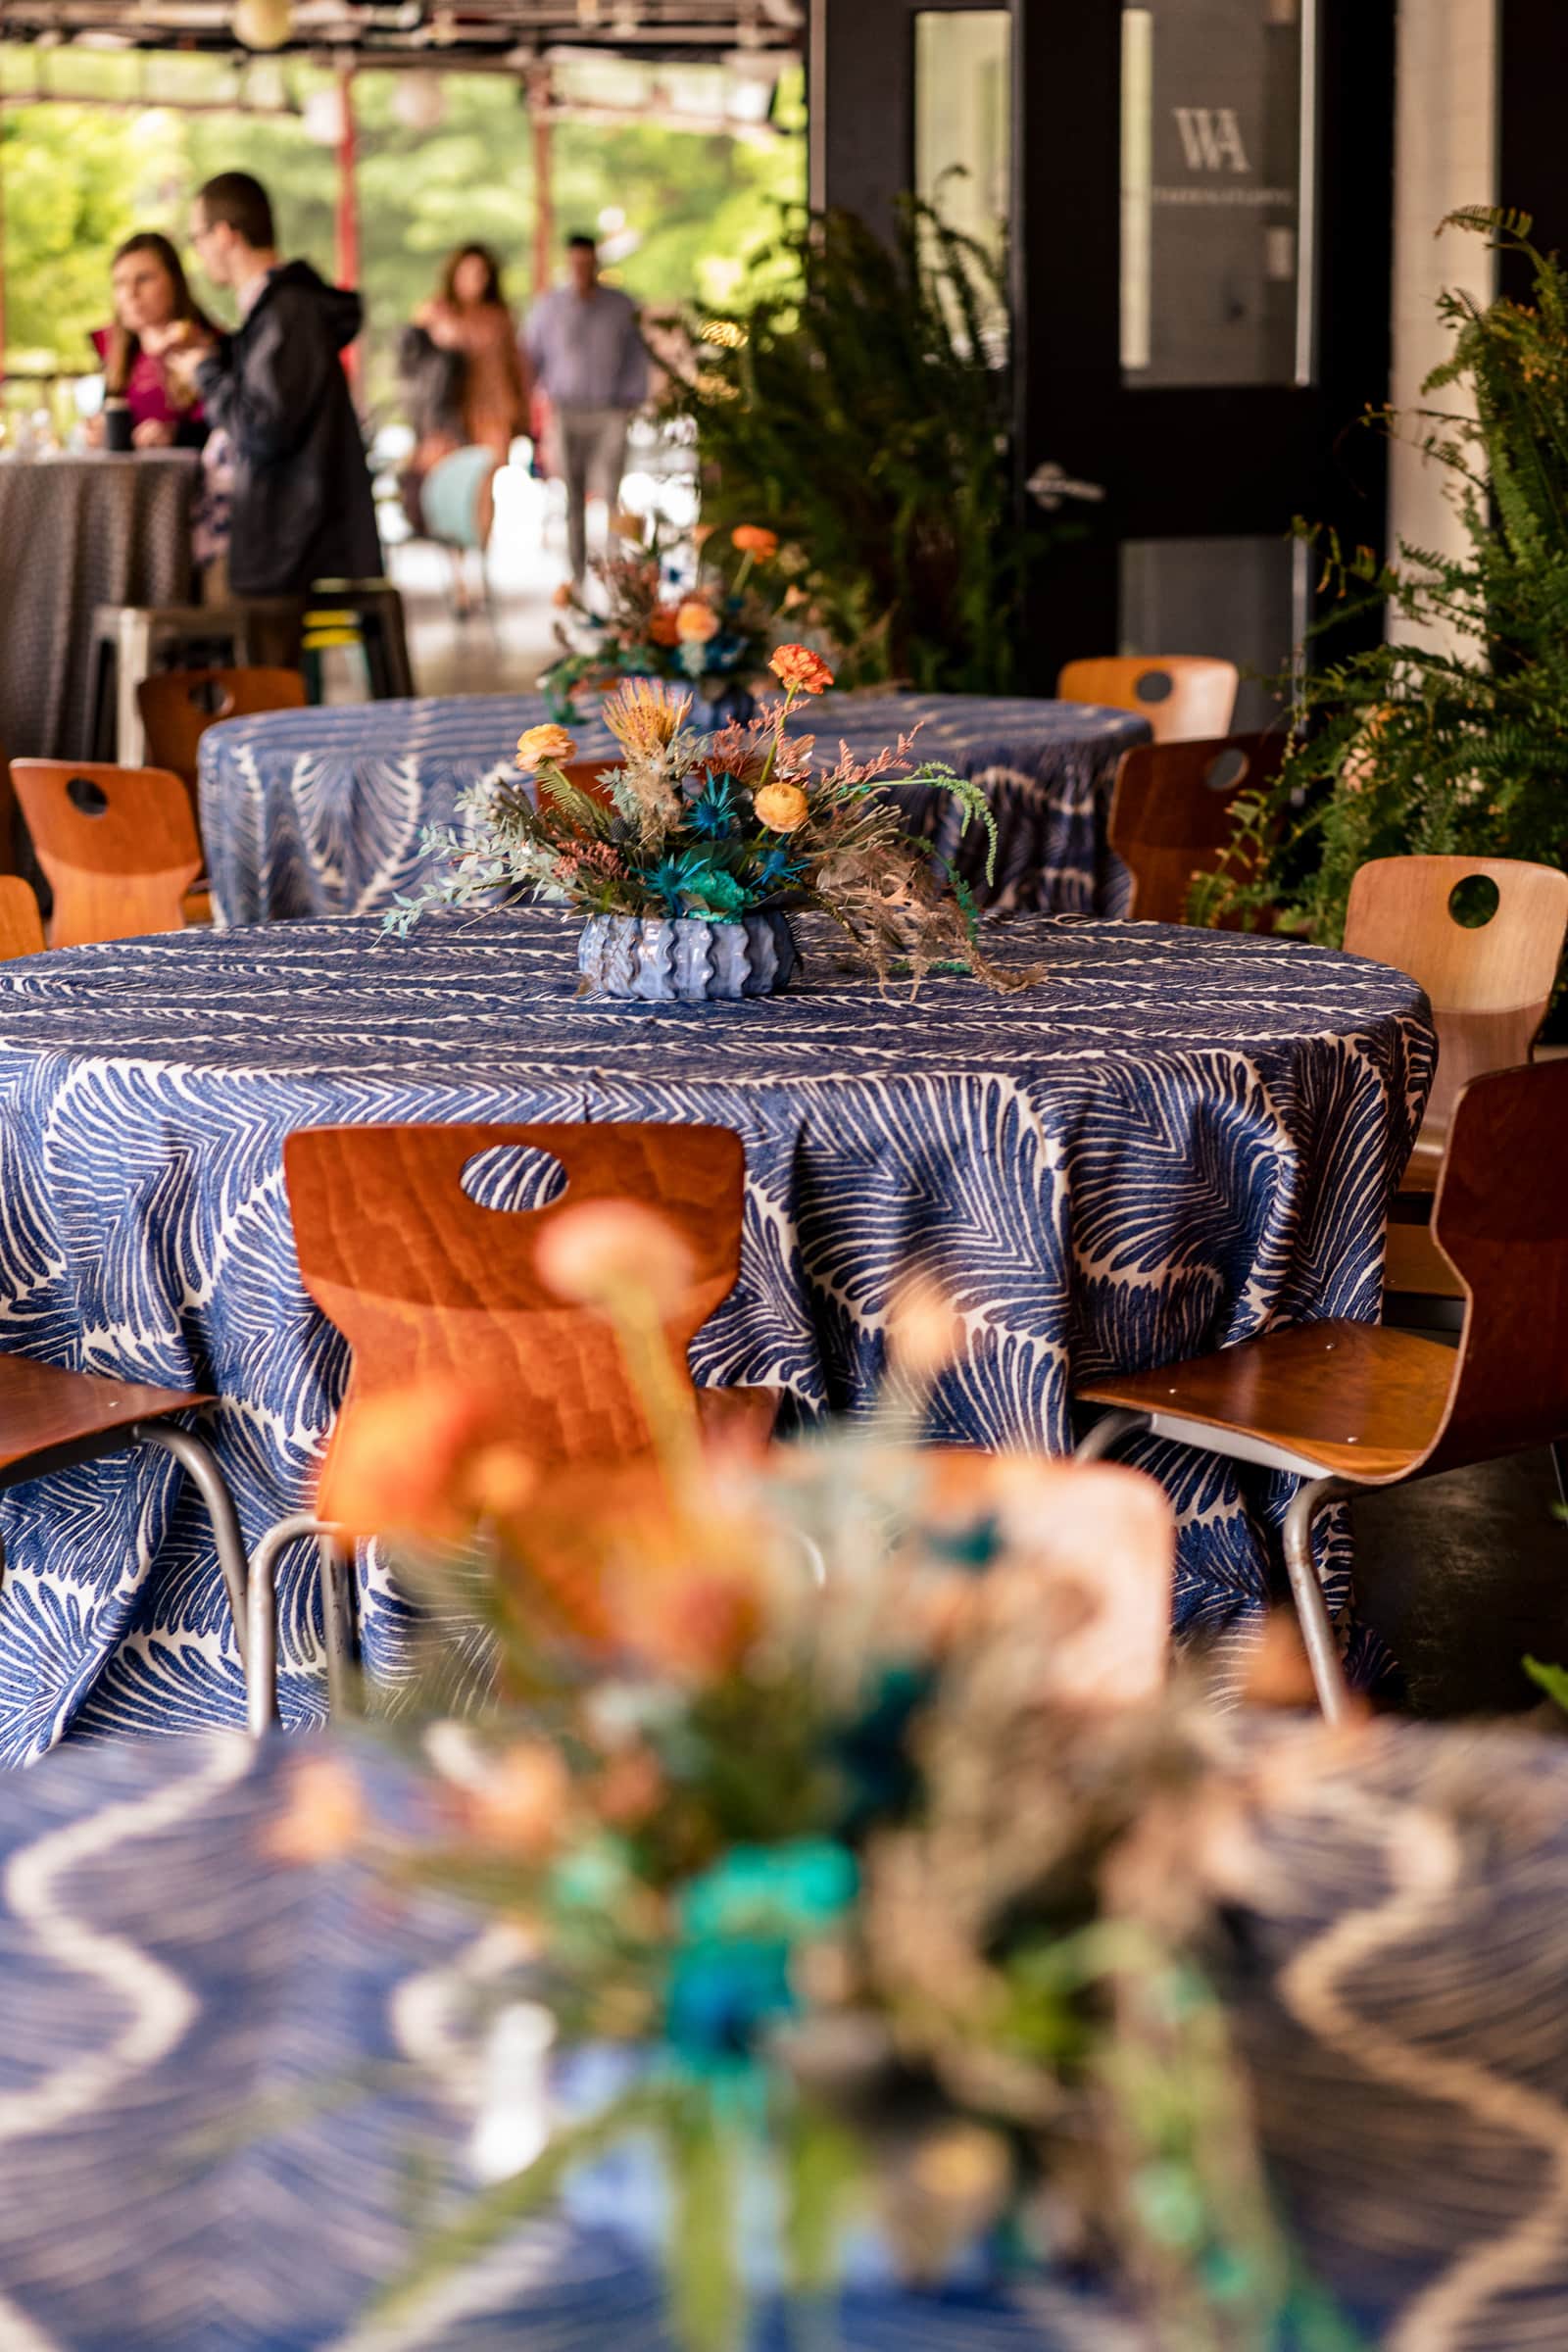 tables on the deck at Whitaker & Atlantic wedding are decorated with blue and white table cloths and yellow and orange florals | photo by Kivus & Camera